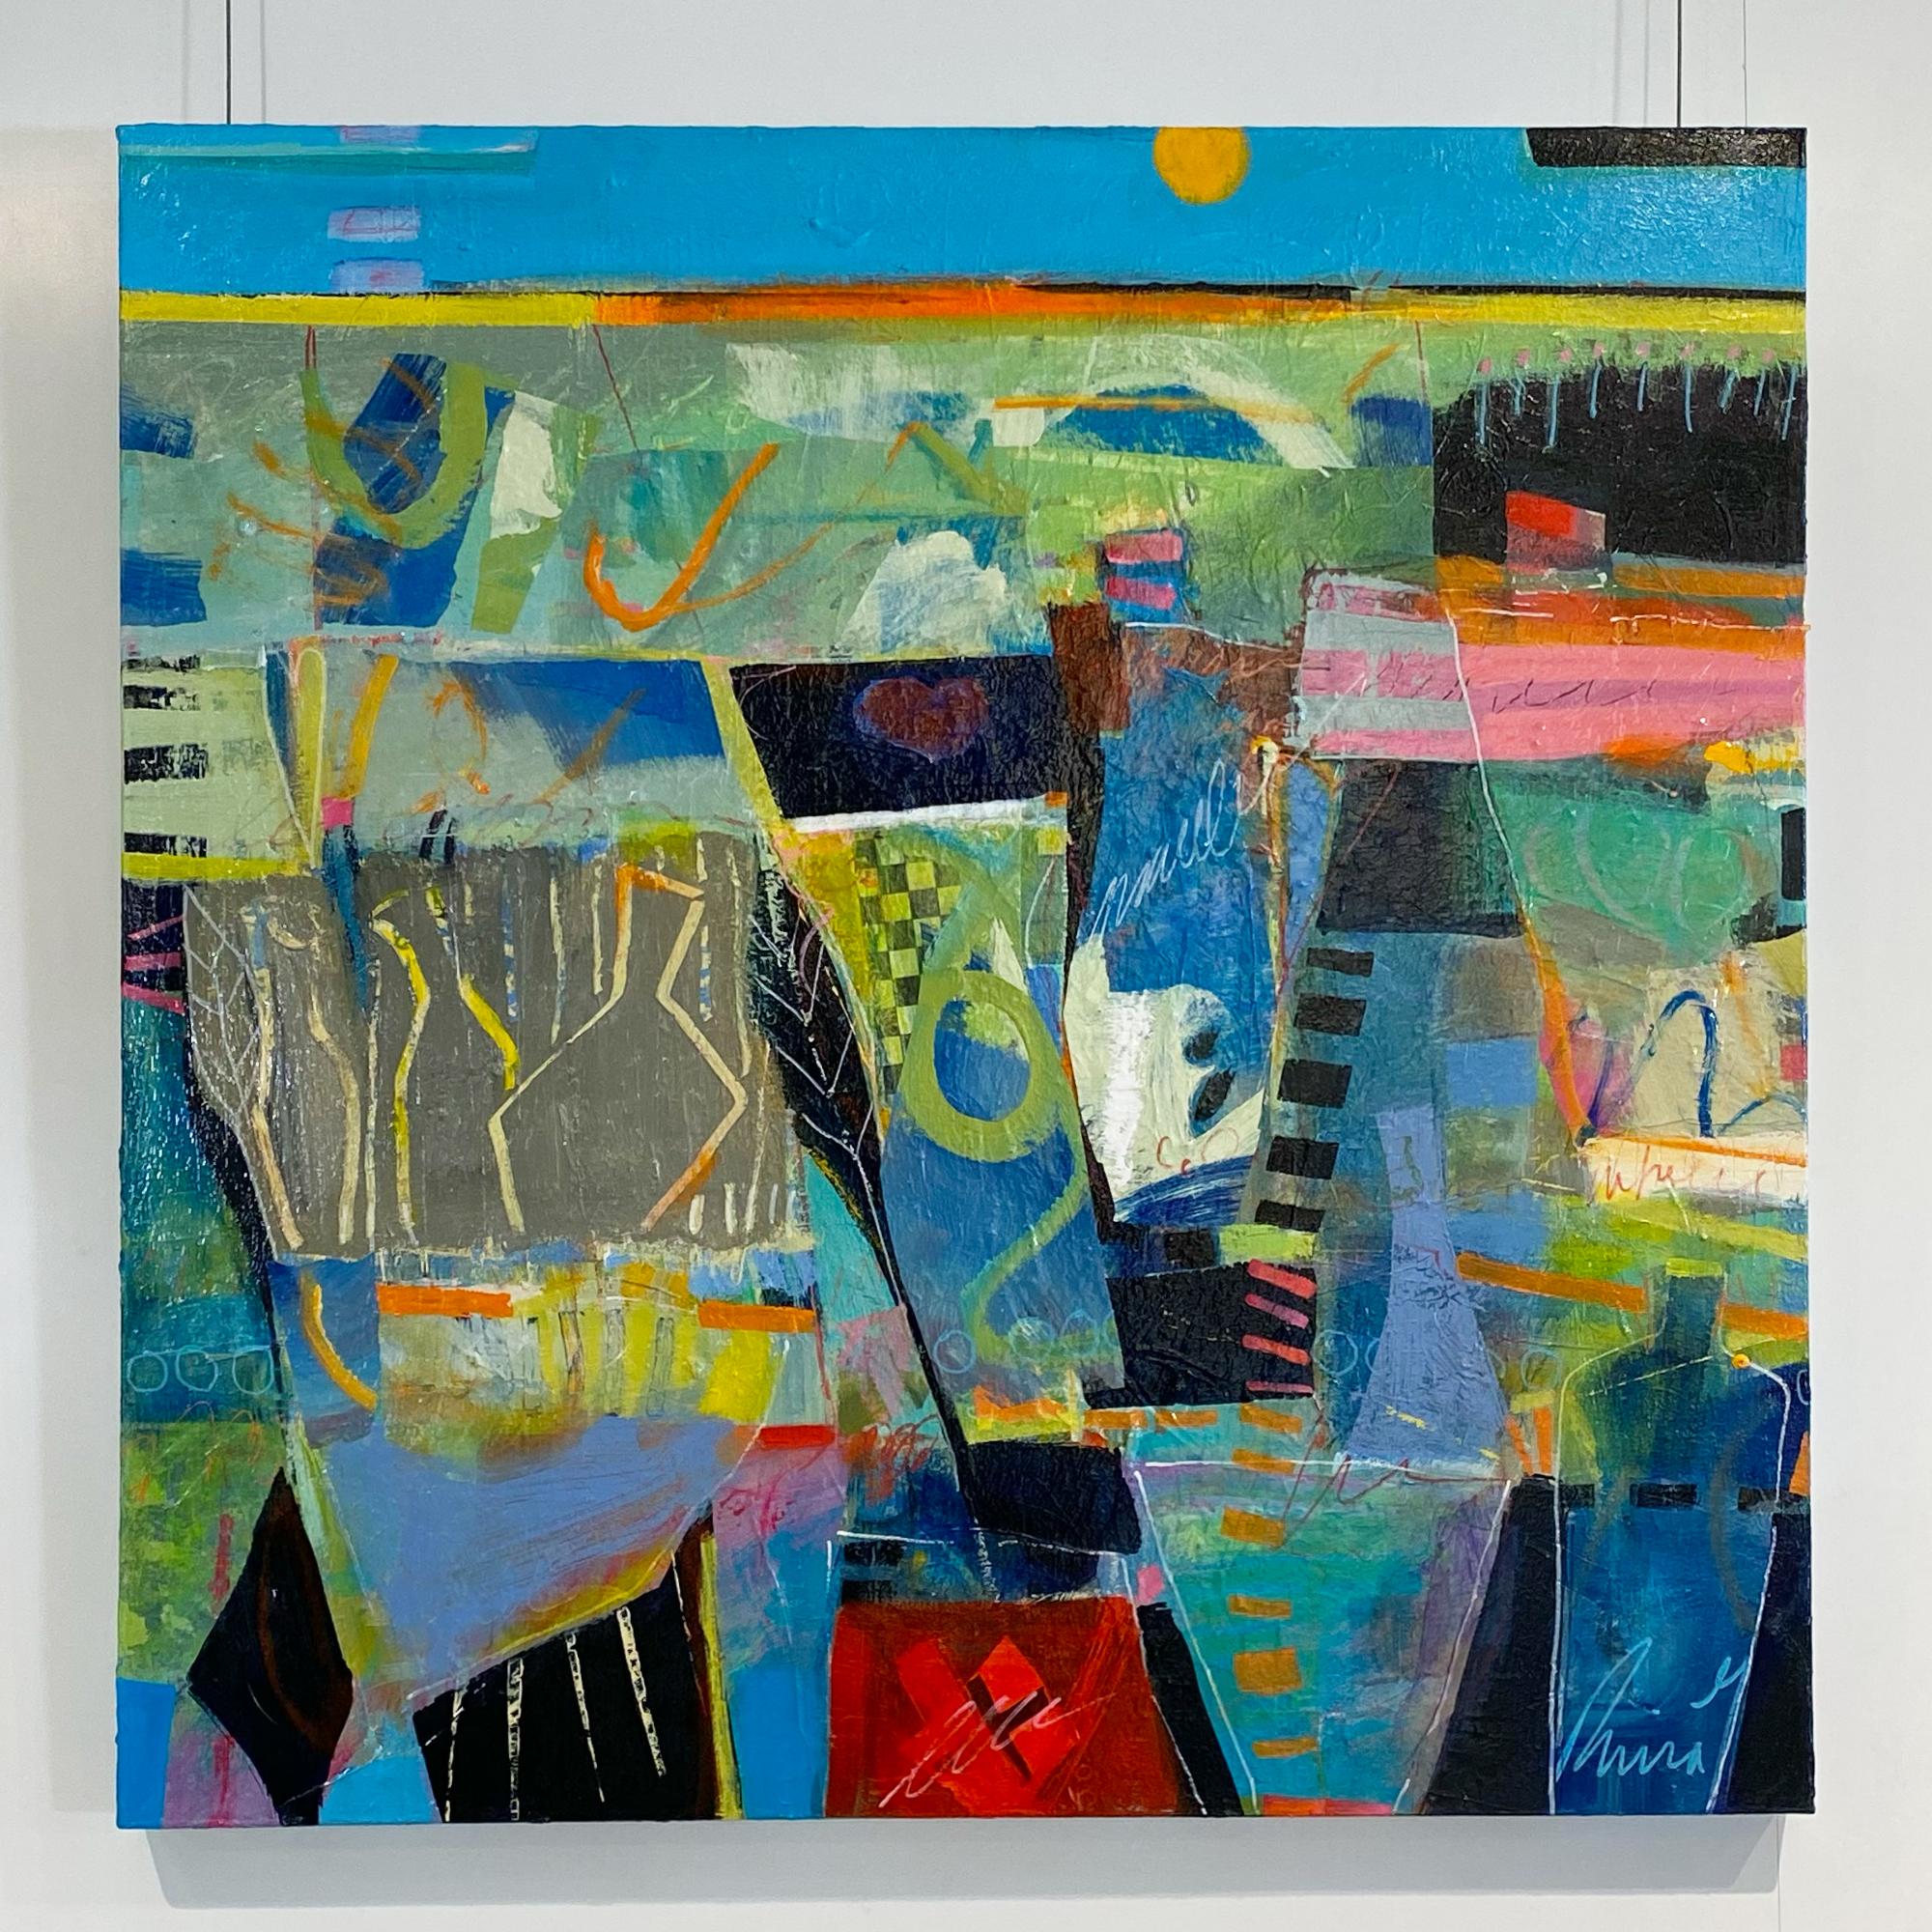 Beneath the Same Blue Sky, colorful mixed media, abstract painting on canvas - Art by Rina Gottesman